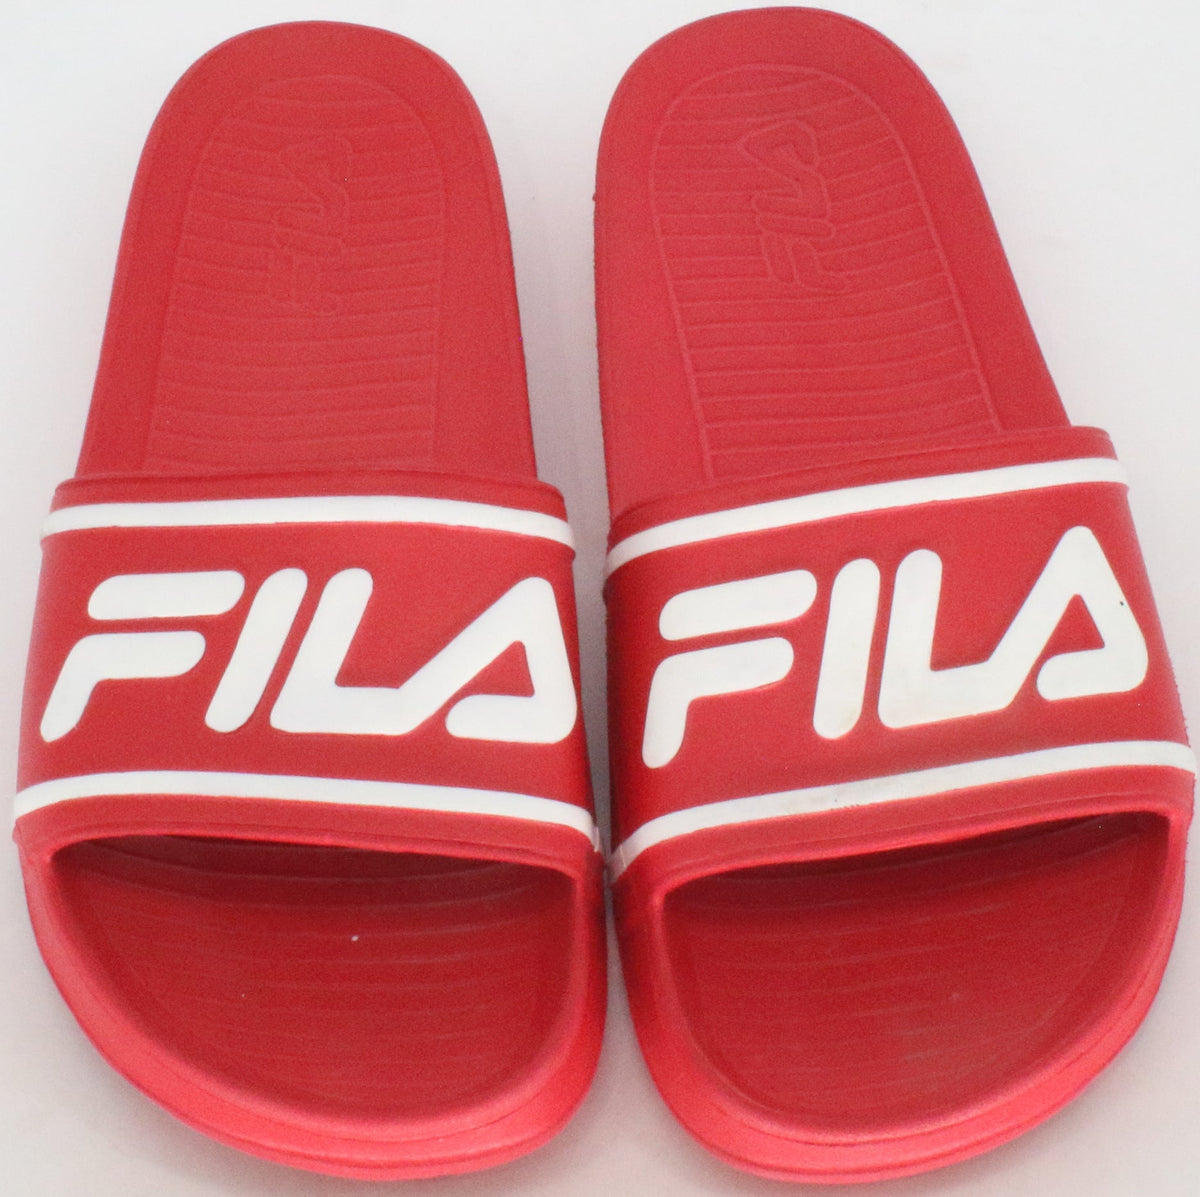 Fila Red and White Sandals